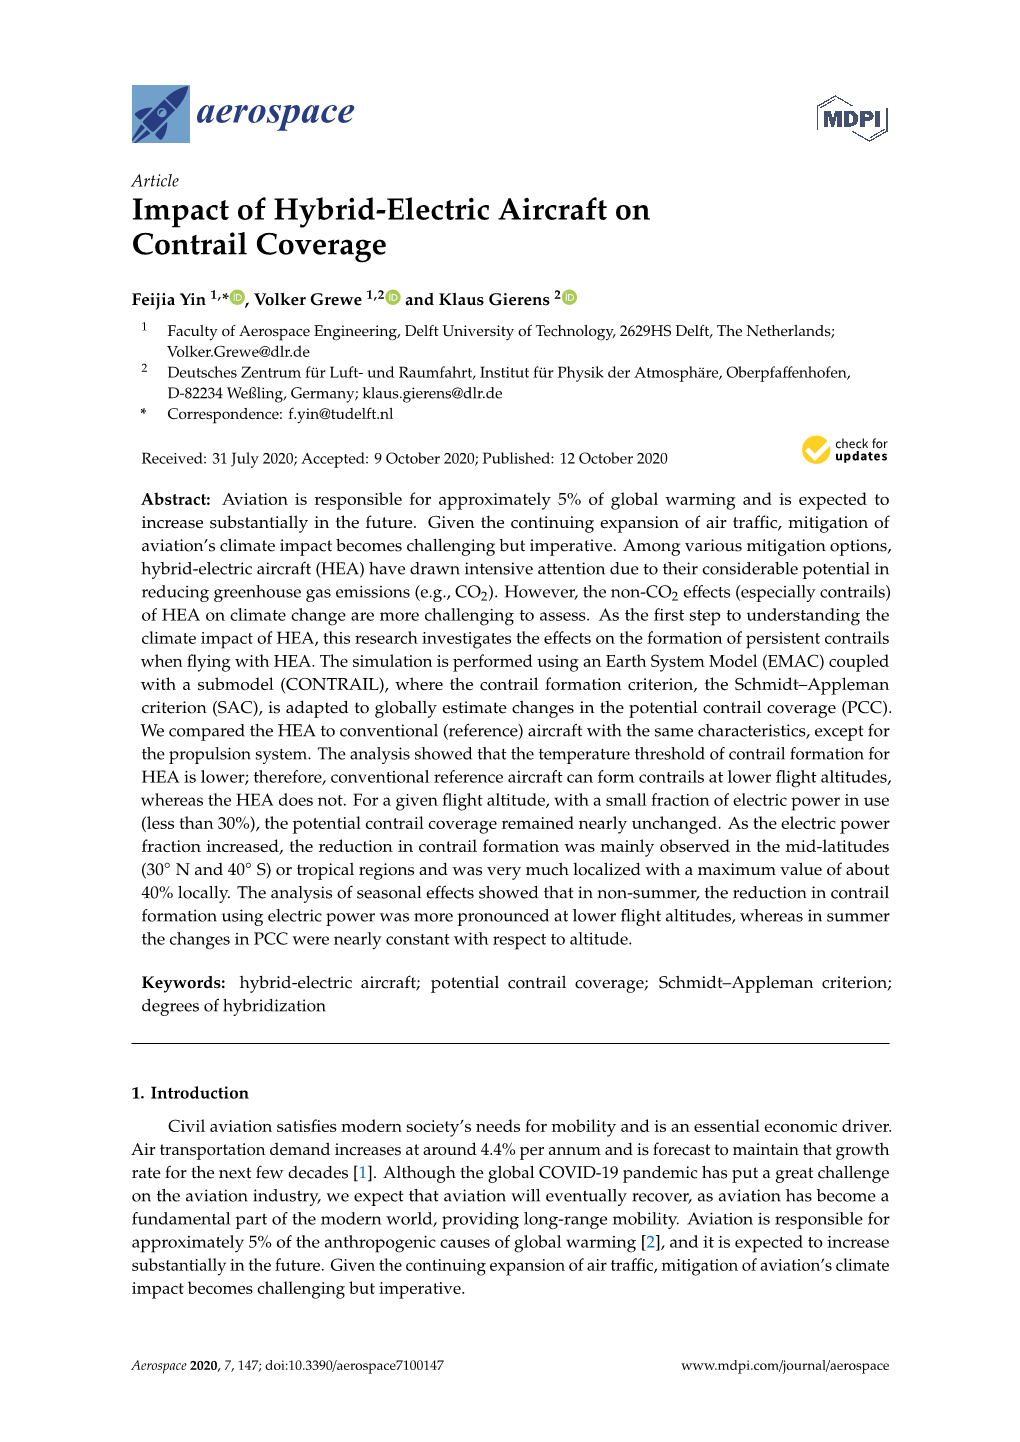 Impact of Hybrid-Electric Aircraft on Contrail Coverage